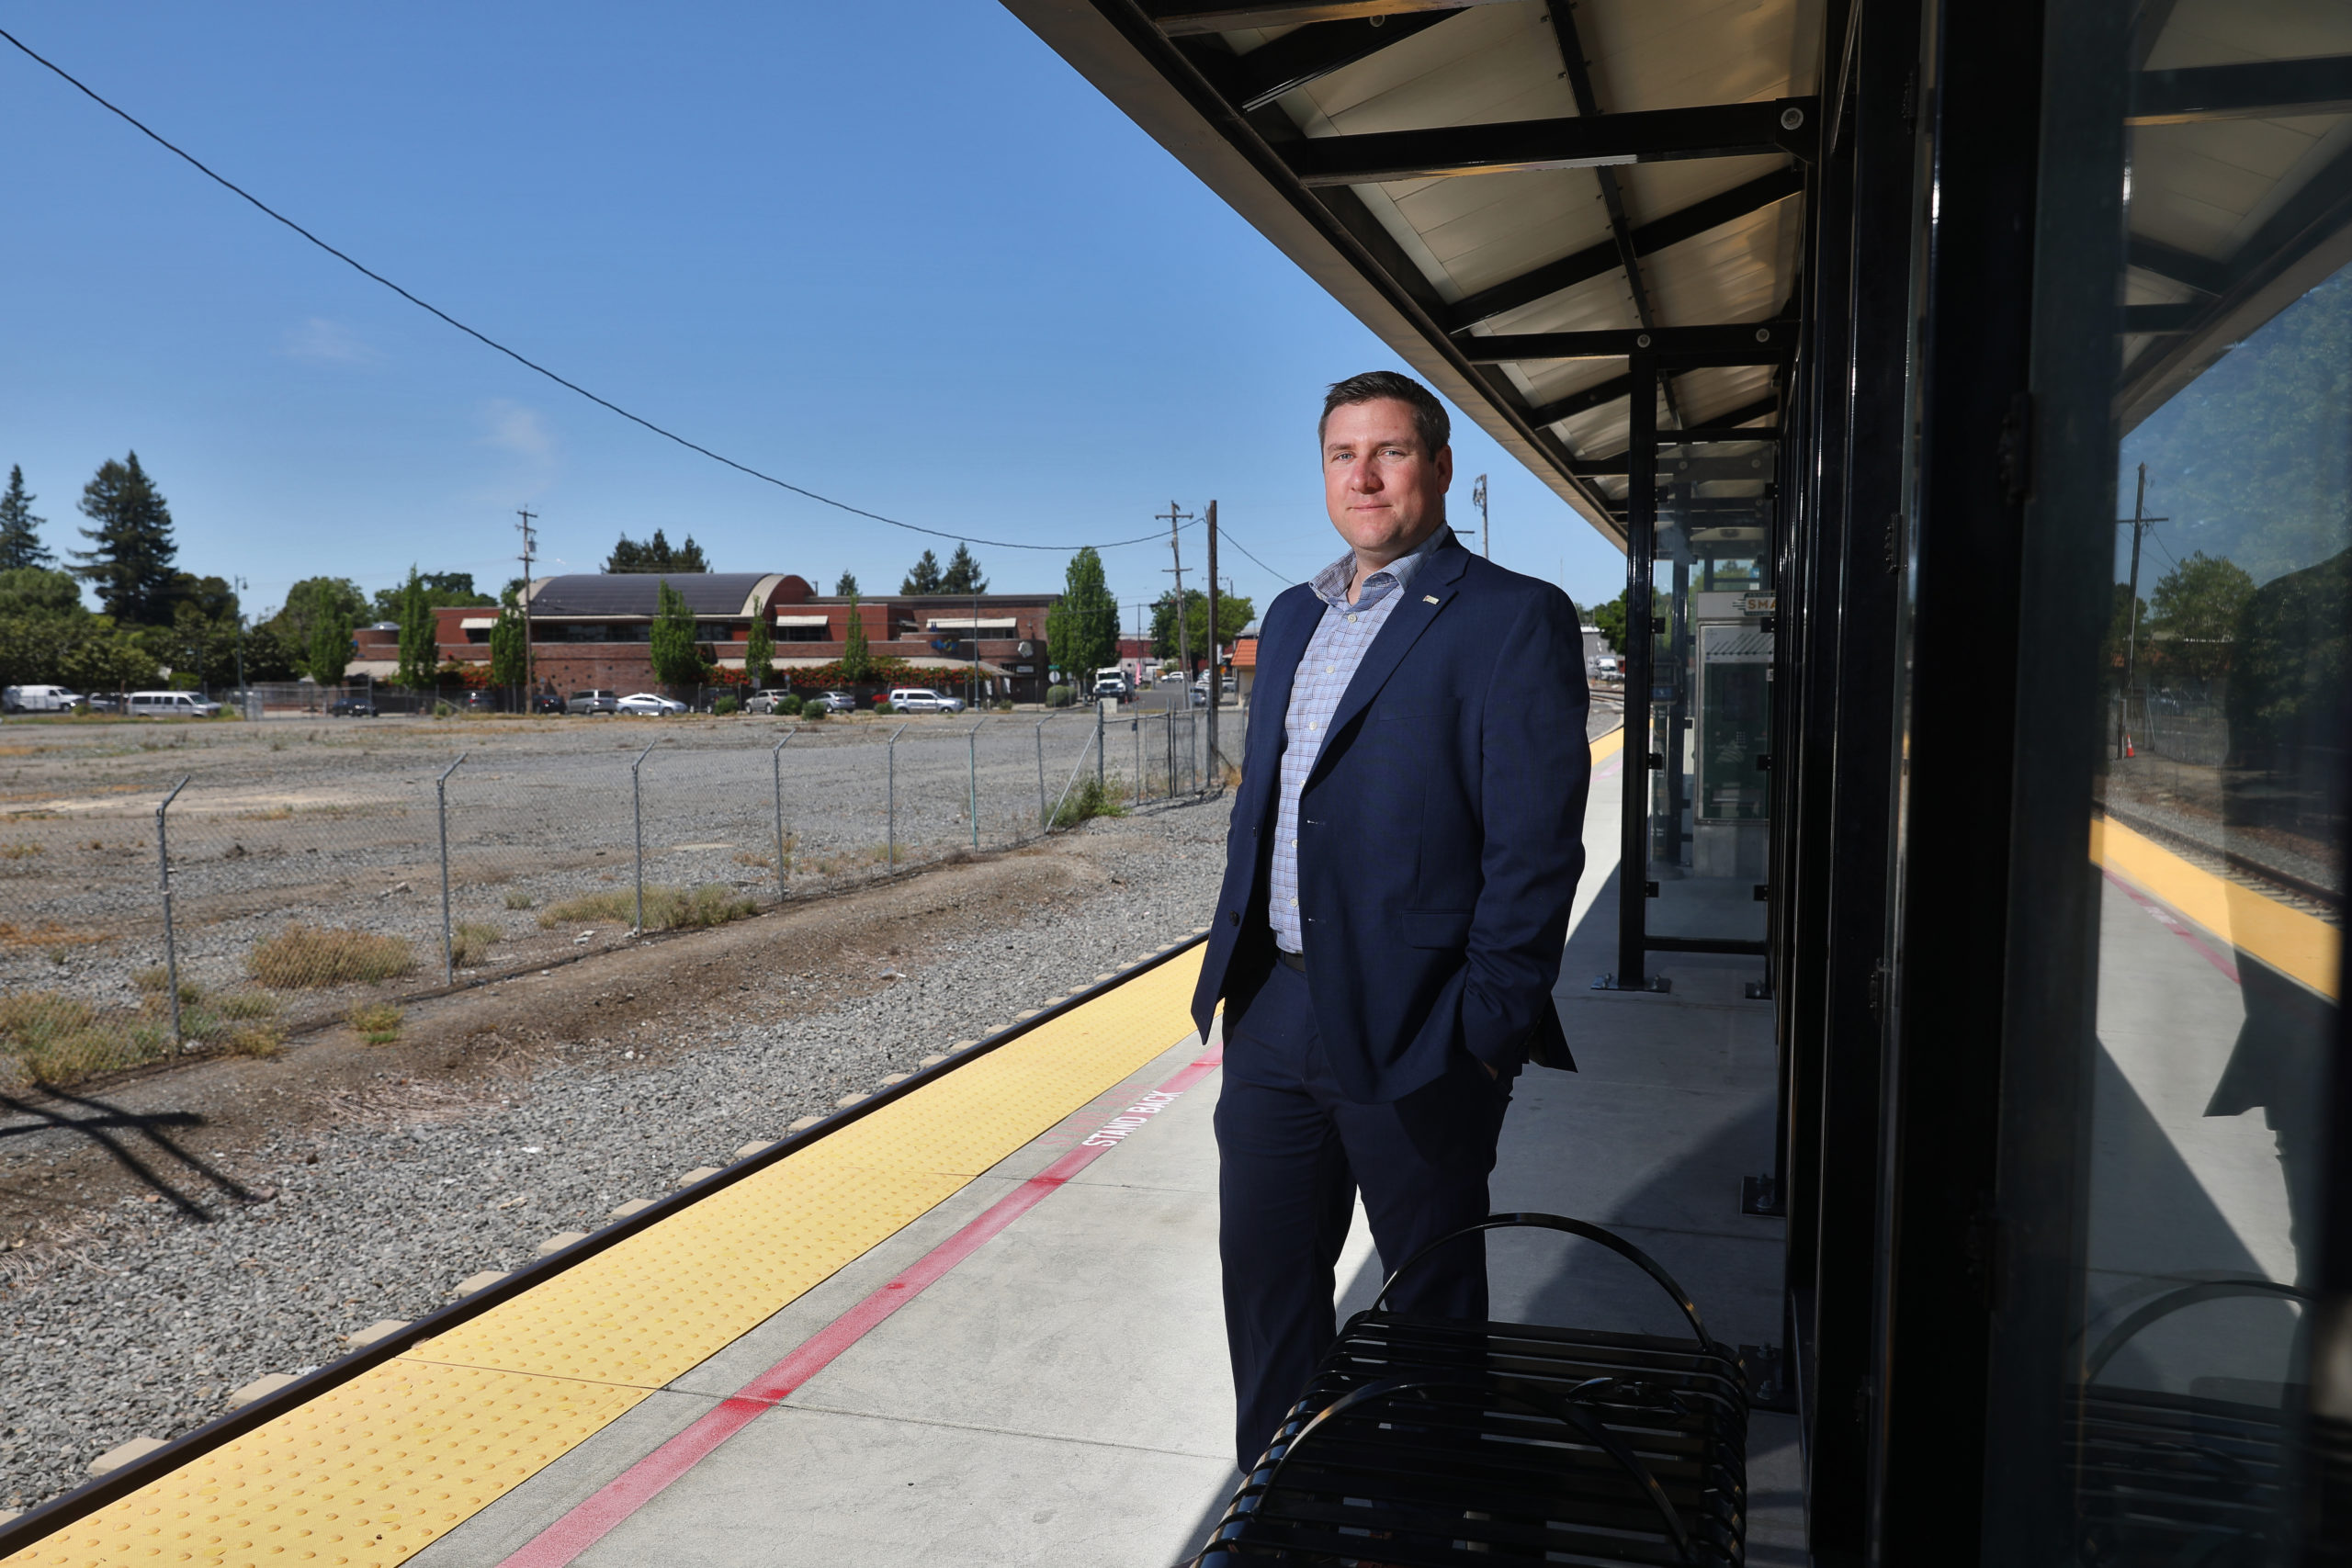 Santa Rosa Mayor Chris Rogers stands on the SMART platform in Railroad Square. SMART has sold the land on the west side of the tracks for future housing development. (Christopher Chung/ The Press Democrat)